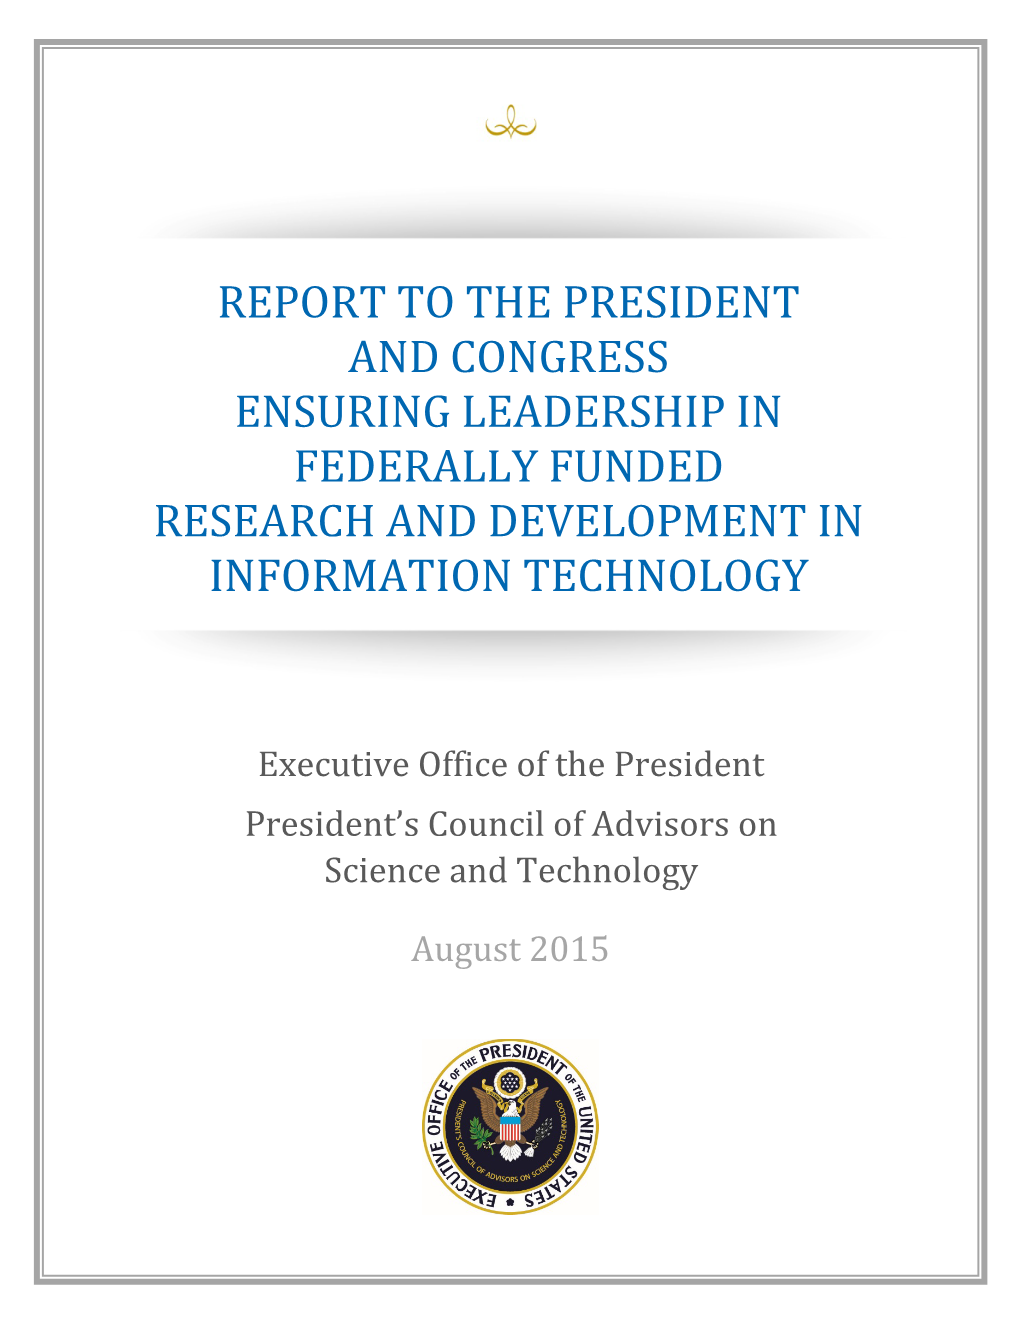 President's Council of Advisors on Science and Technology